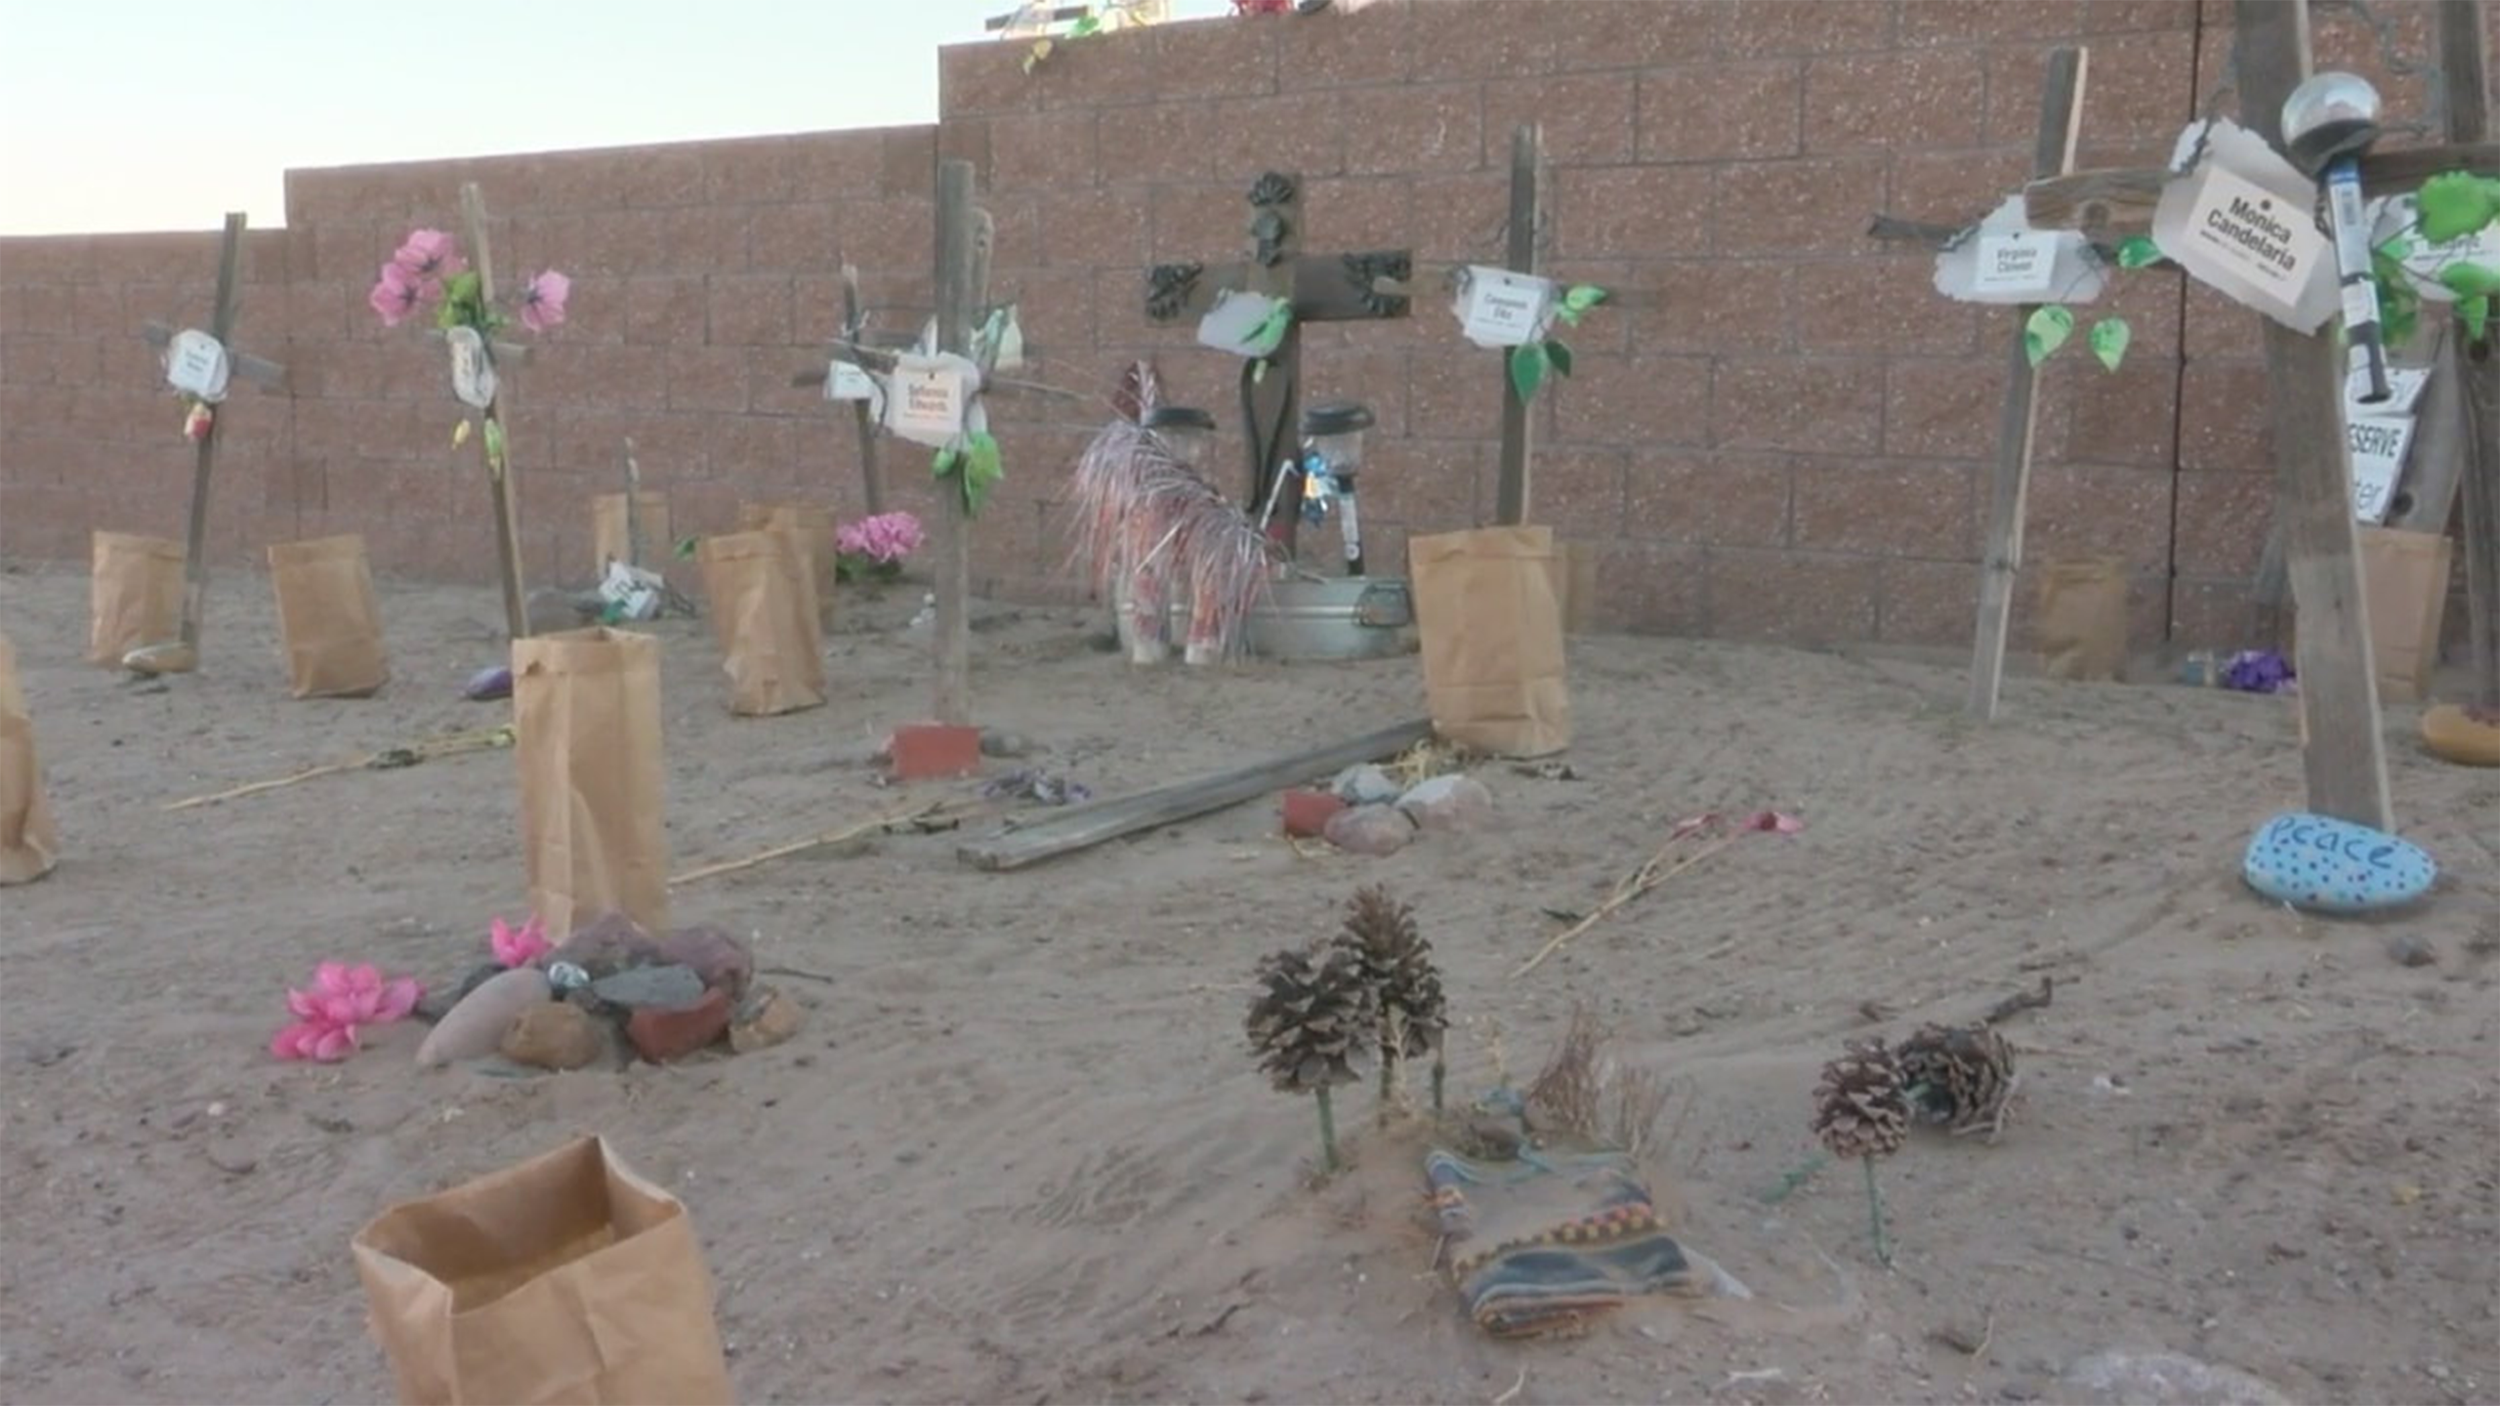   The West Mesa Bone Collector   In February of 2009, a mass grave would be discovered just outside of New Mexico’s largest city…     Learn More  